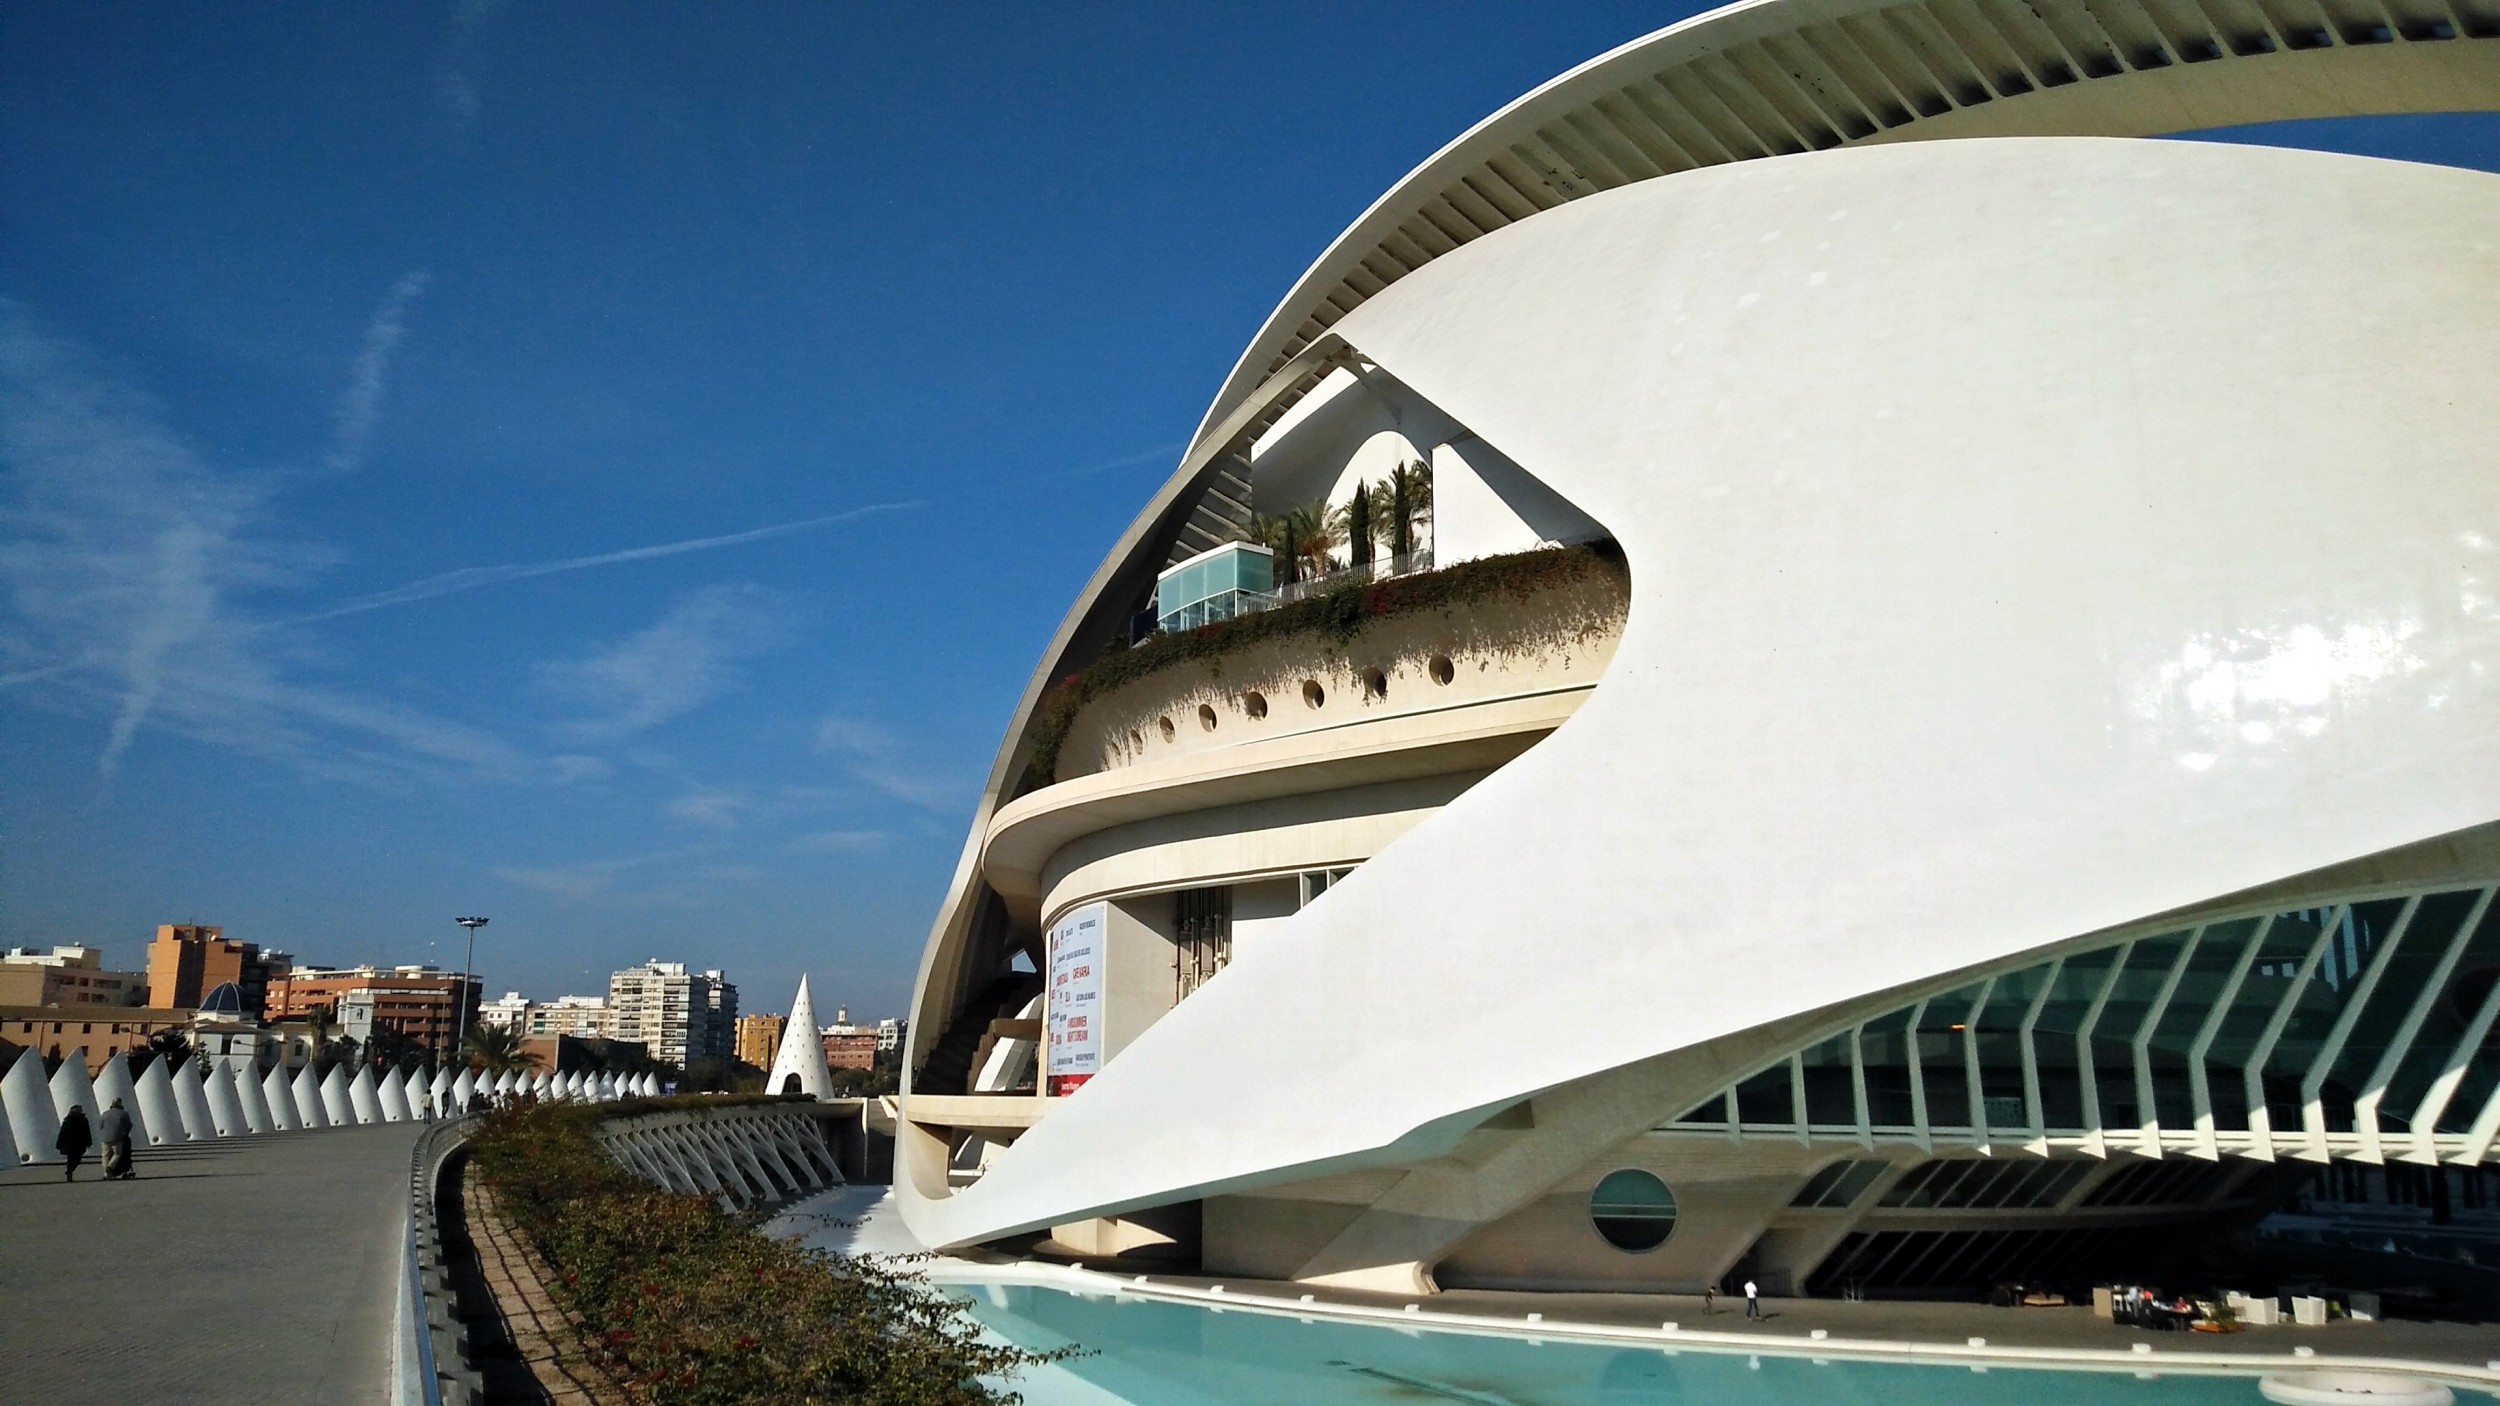 nice City of Arts and Sciences image